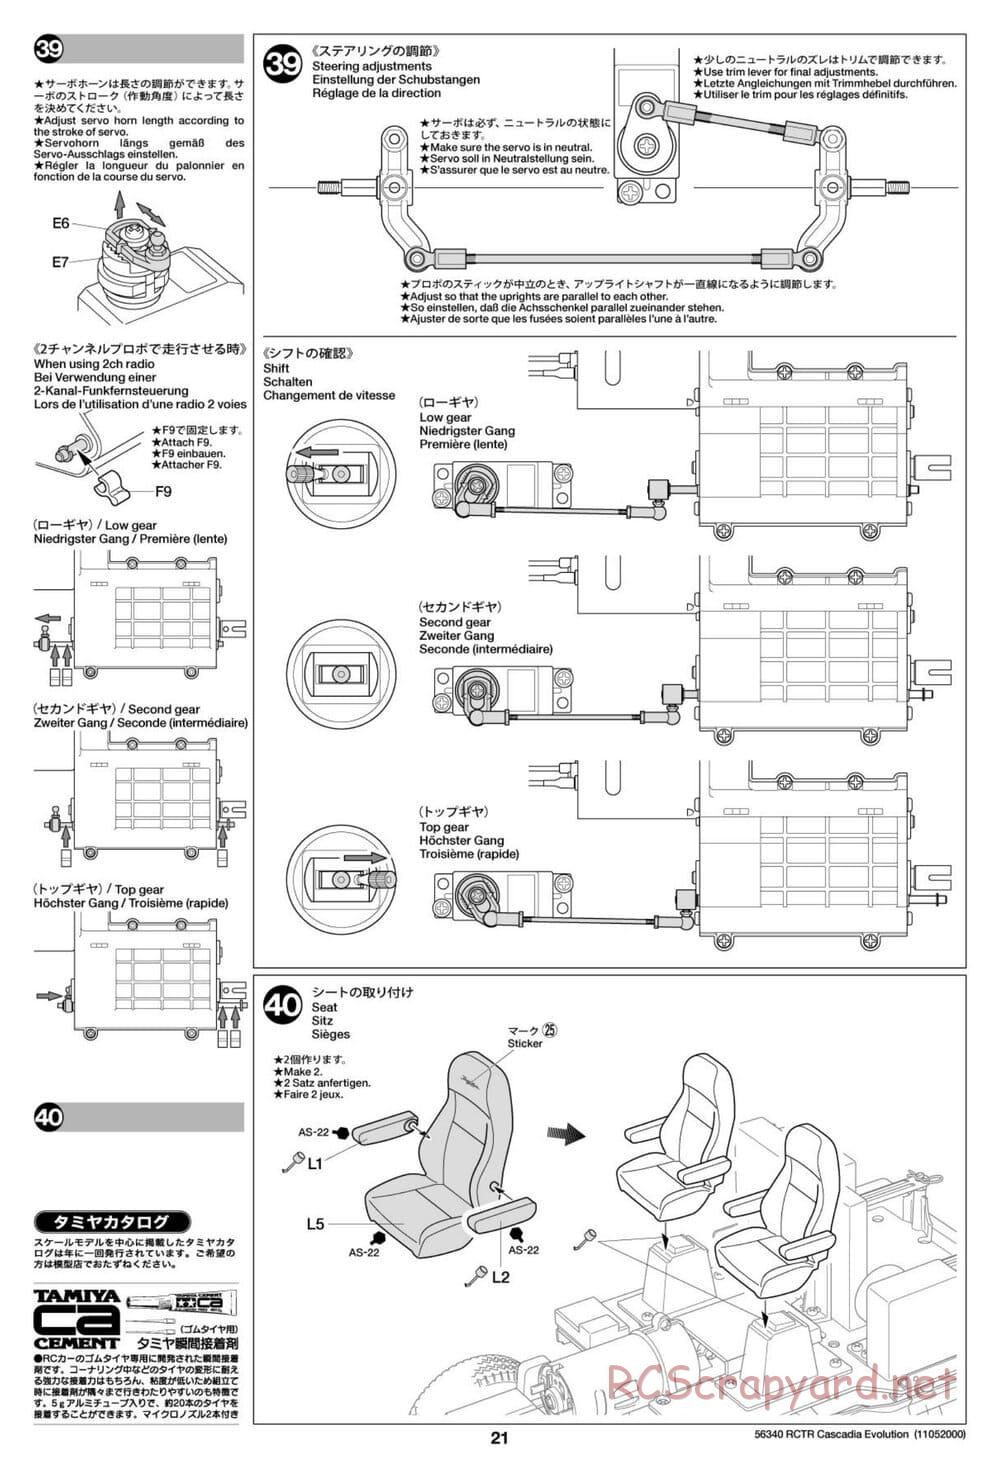 Tamiya - Freightliner Cascadia Evolution Tractor Truck Chassis - Manual - Page 21